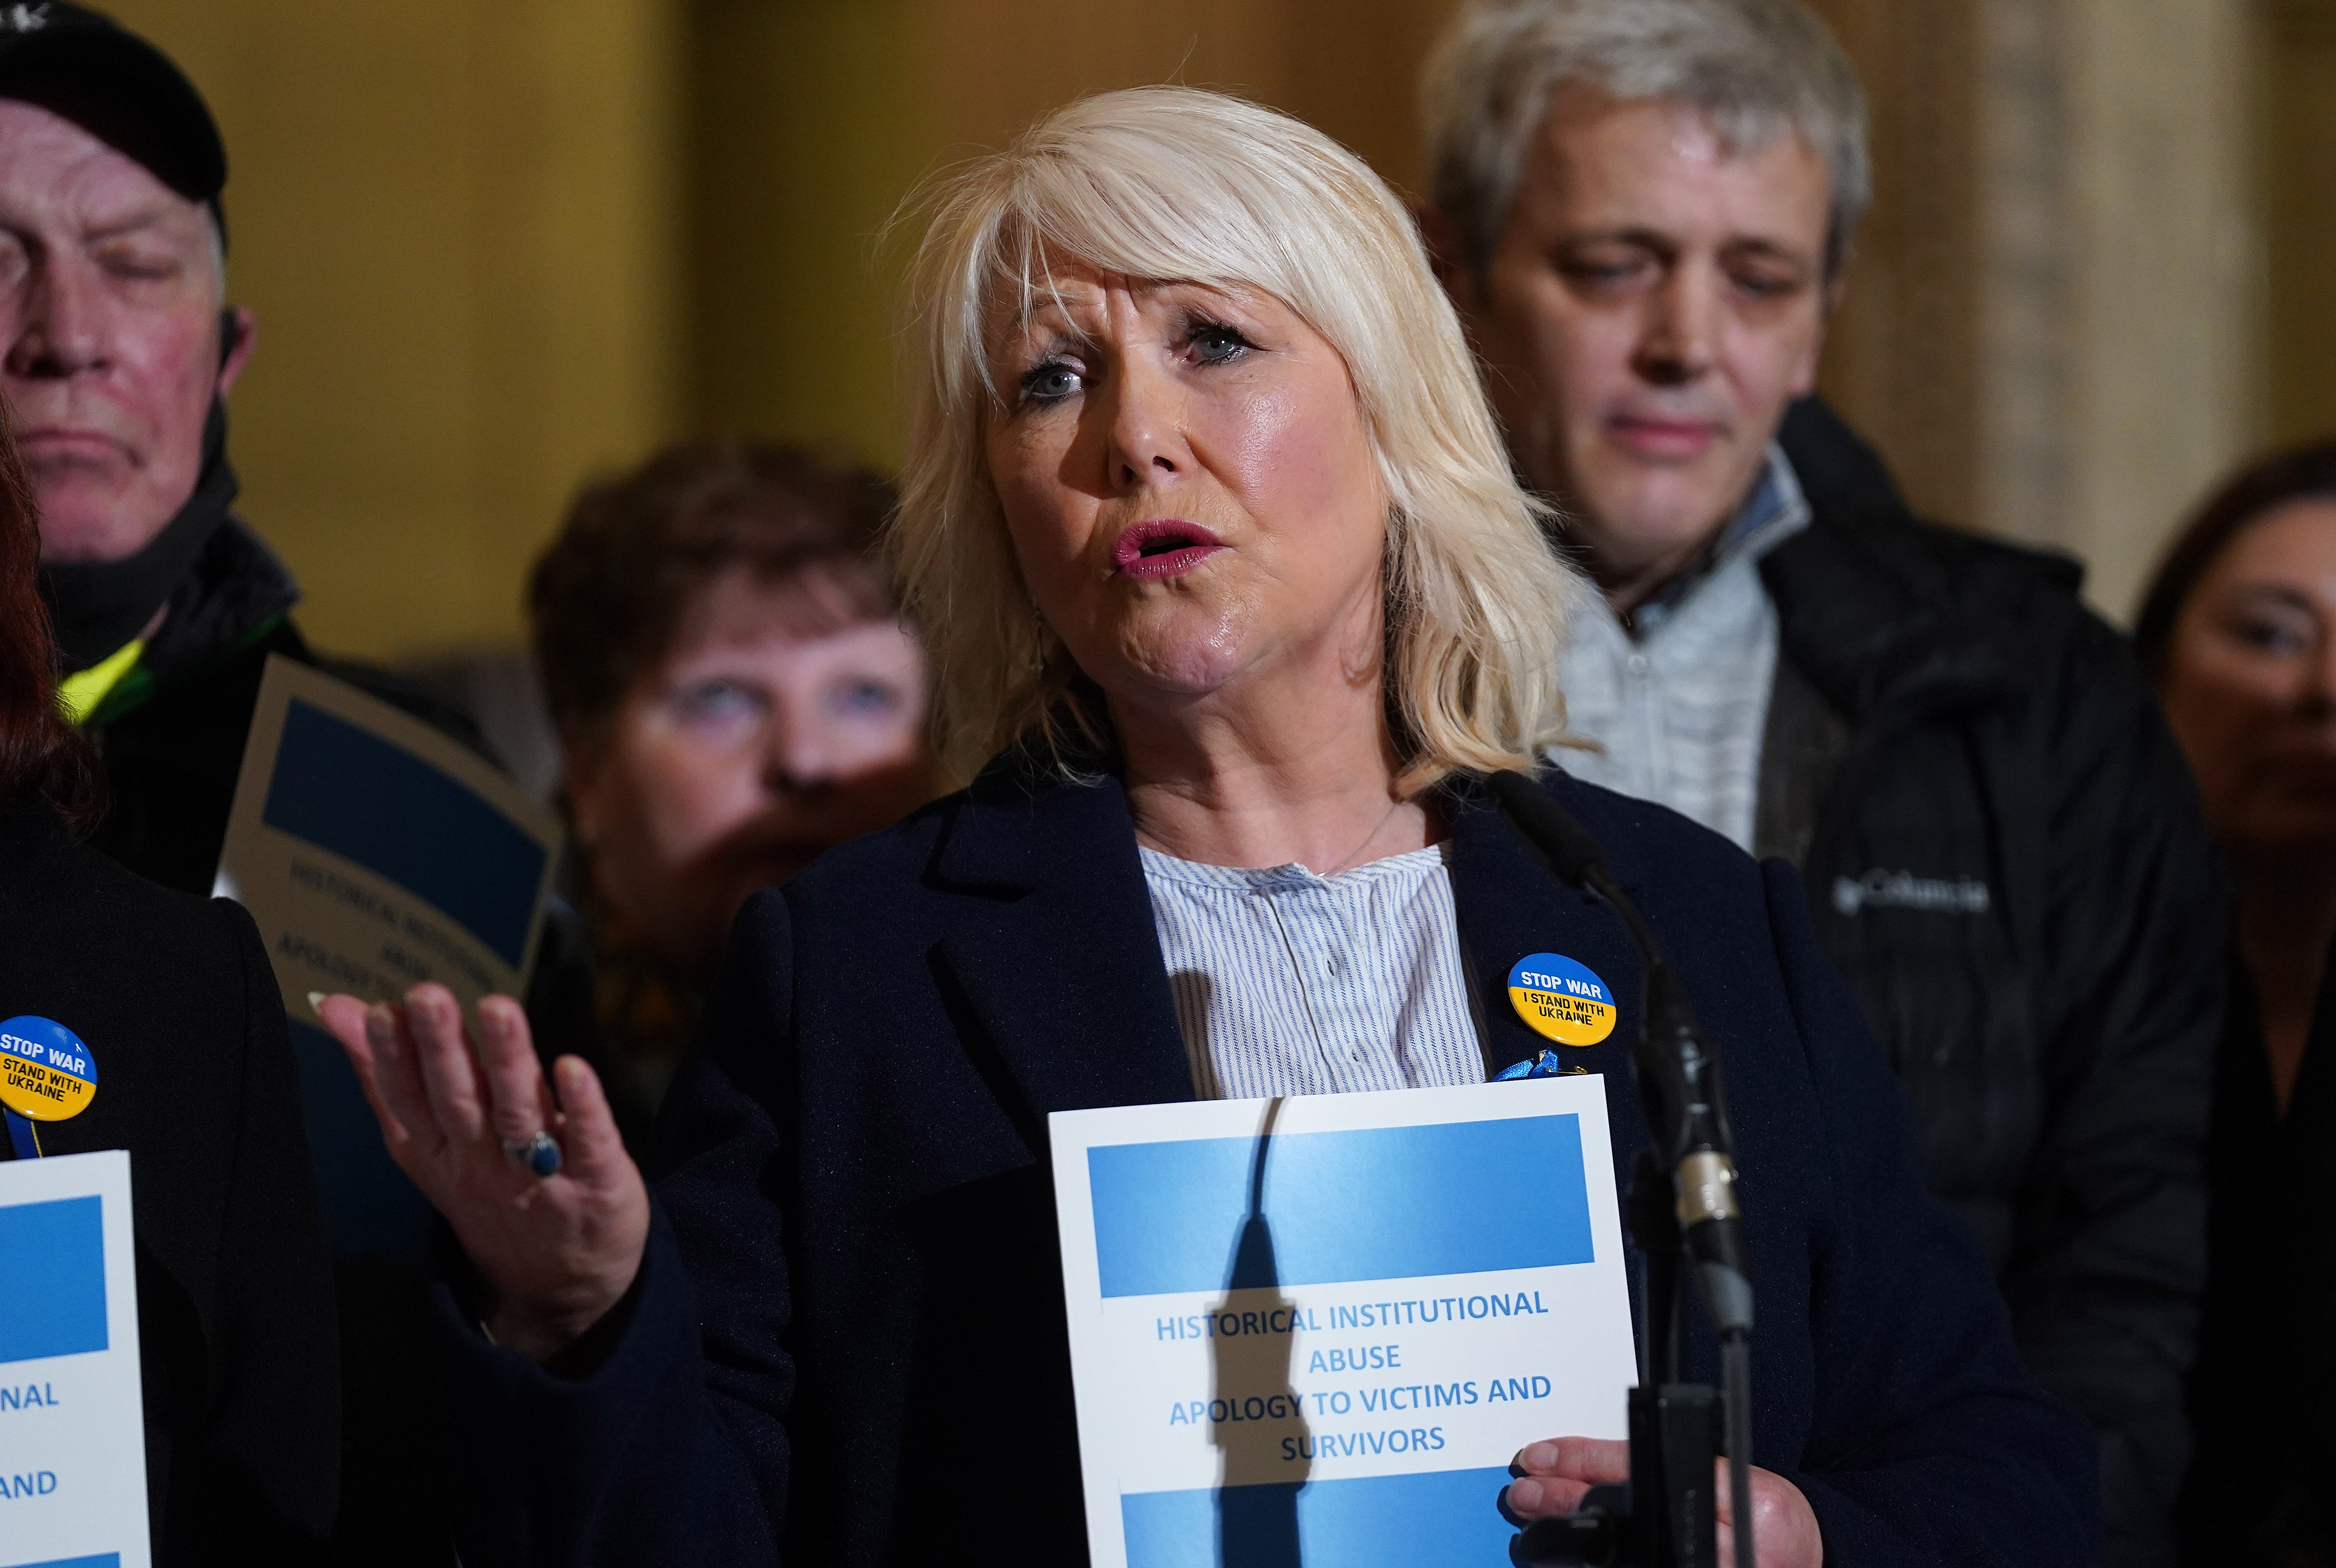 Margaret McGuckin of the Savia lobby group during a press briefing in the Great Hall at Stormont following the delivery of the long-awaited public apology to the victims of historical institutional abuse (Brian Lawless/PA)